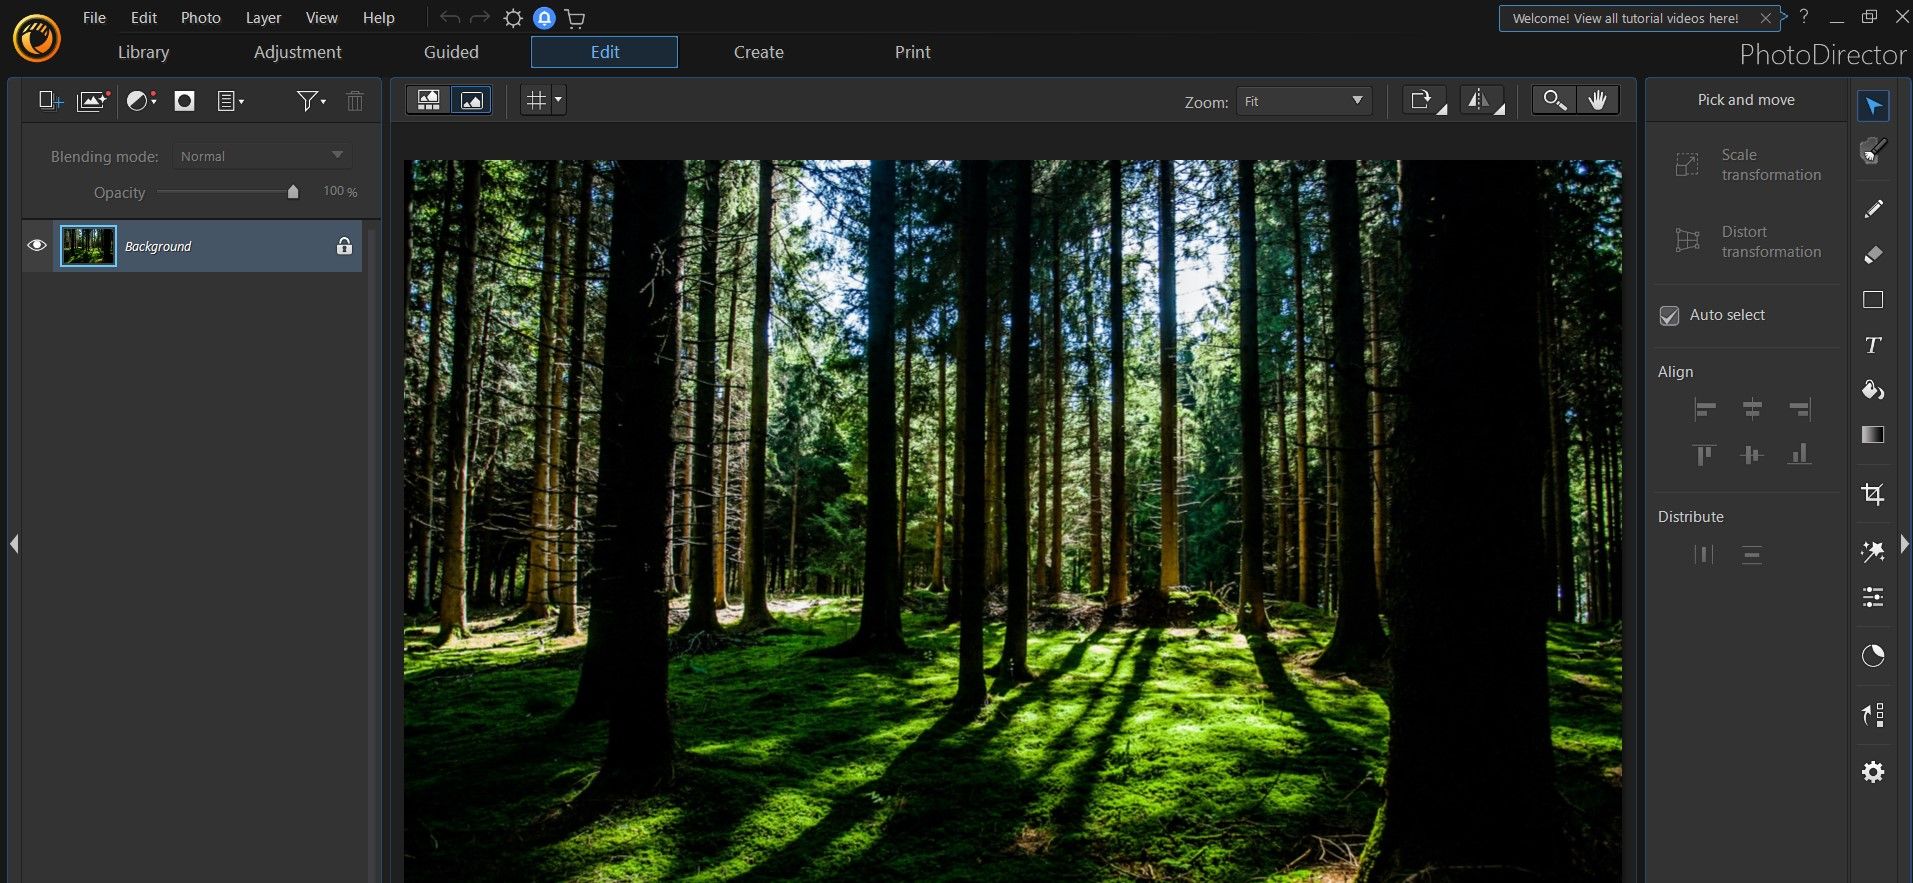 Editing an image in Photodirector